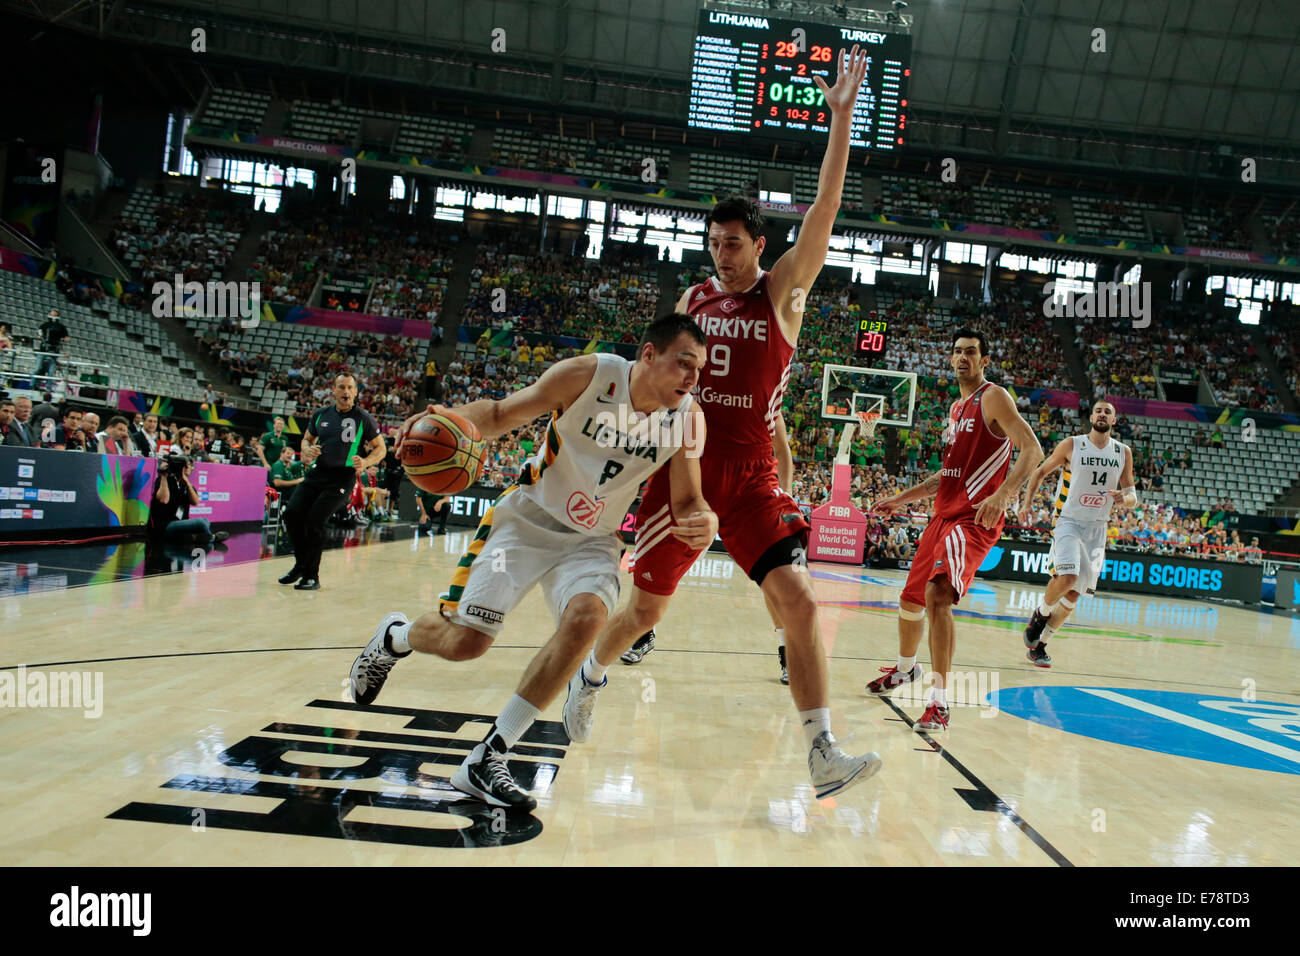 Barcelona, Spain. 9th Sep, 2014. Jonas Maciulis (L) of Lithuania drives the ball in front of Emir Preldzic of Turkey during the quarterfinal match at the 2014 FIBA Basketball World Cup Spain, in Barcelona, Spain, on Sept. 9, 2014. Credit:  Pau Barrena/Xinhua/Alamy Live News Stock Photo